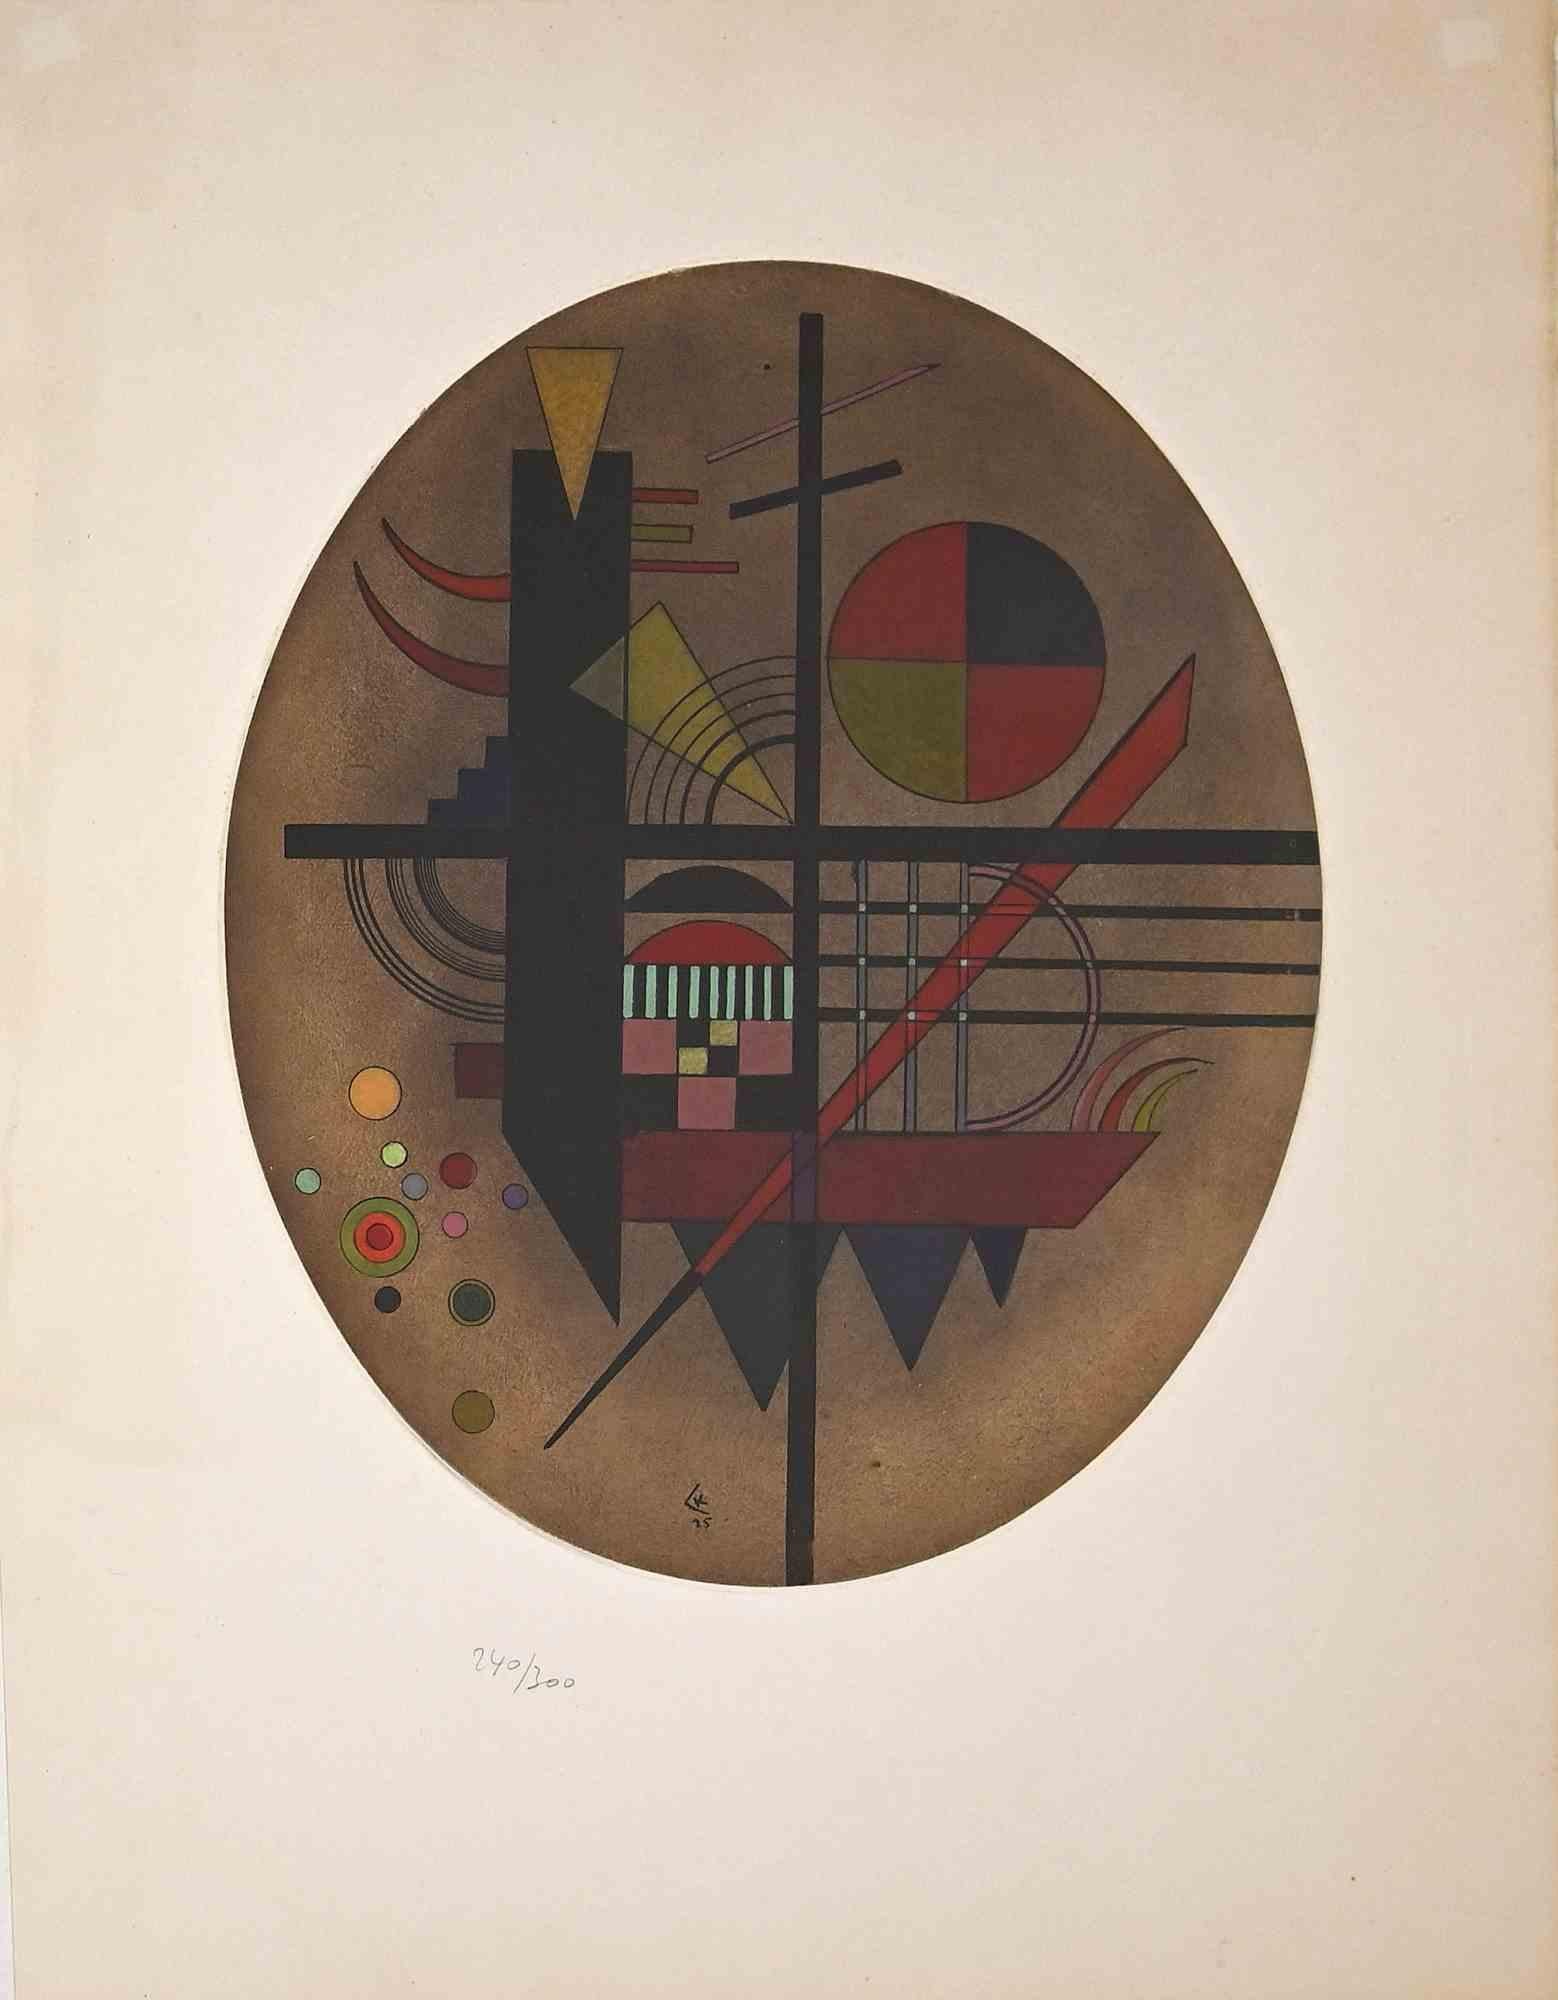 Message Intime is an artwork realized by Maeght Editeur in 1960 after a watercolor by Wassily Kandinsky of 1925.

Etching and Aquatint on BFK Rives paper.

Image dimension: 37x30.5 cm.

Monogrammed and dated in the plate.

Numbered in pencil on the